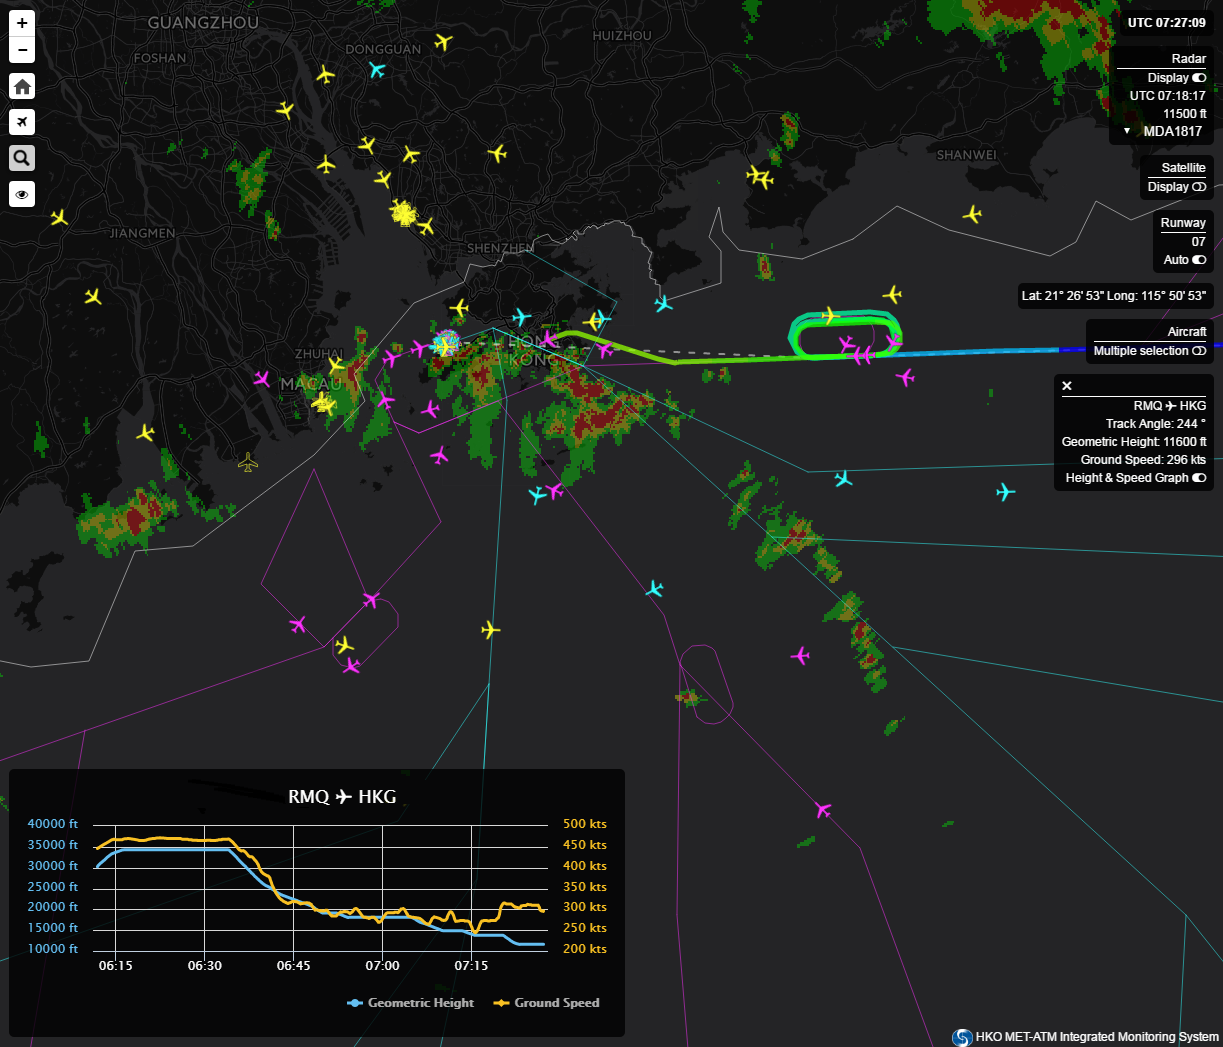 Aircraft positions, flight routes and weather radar imageries on 29 June 2016 shown on the integrated display.